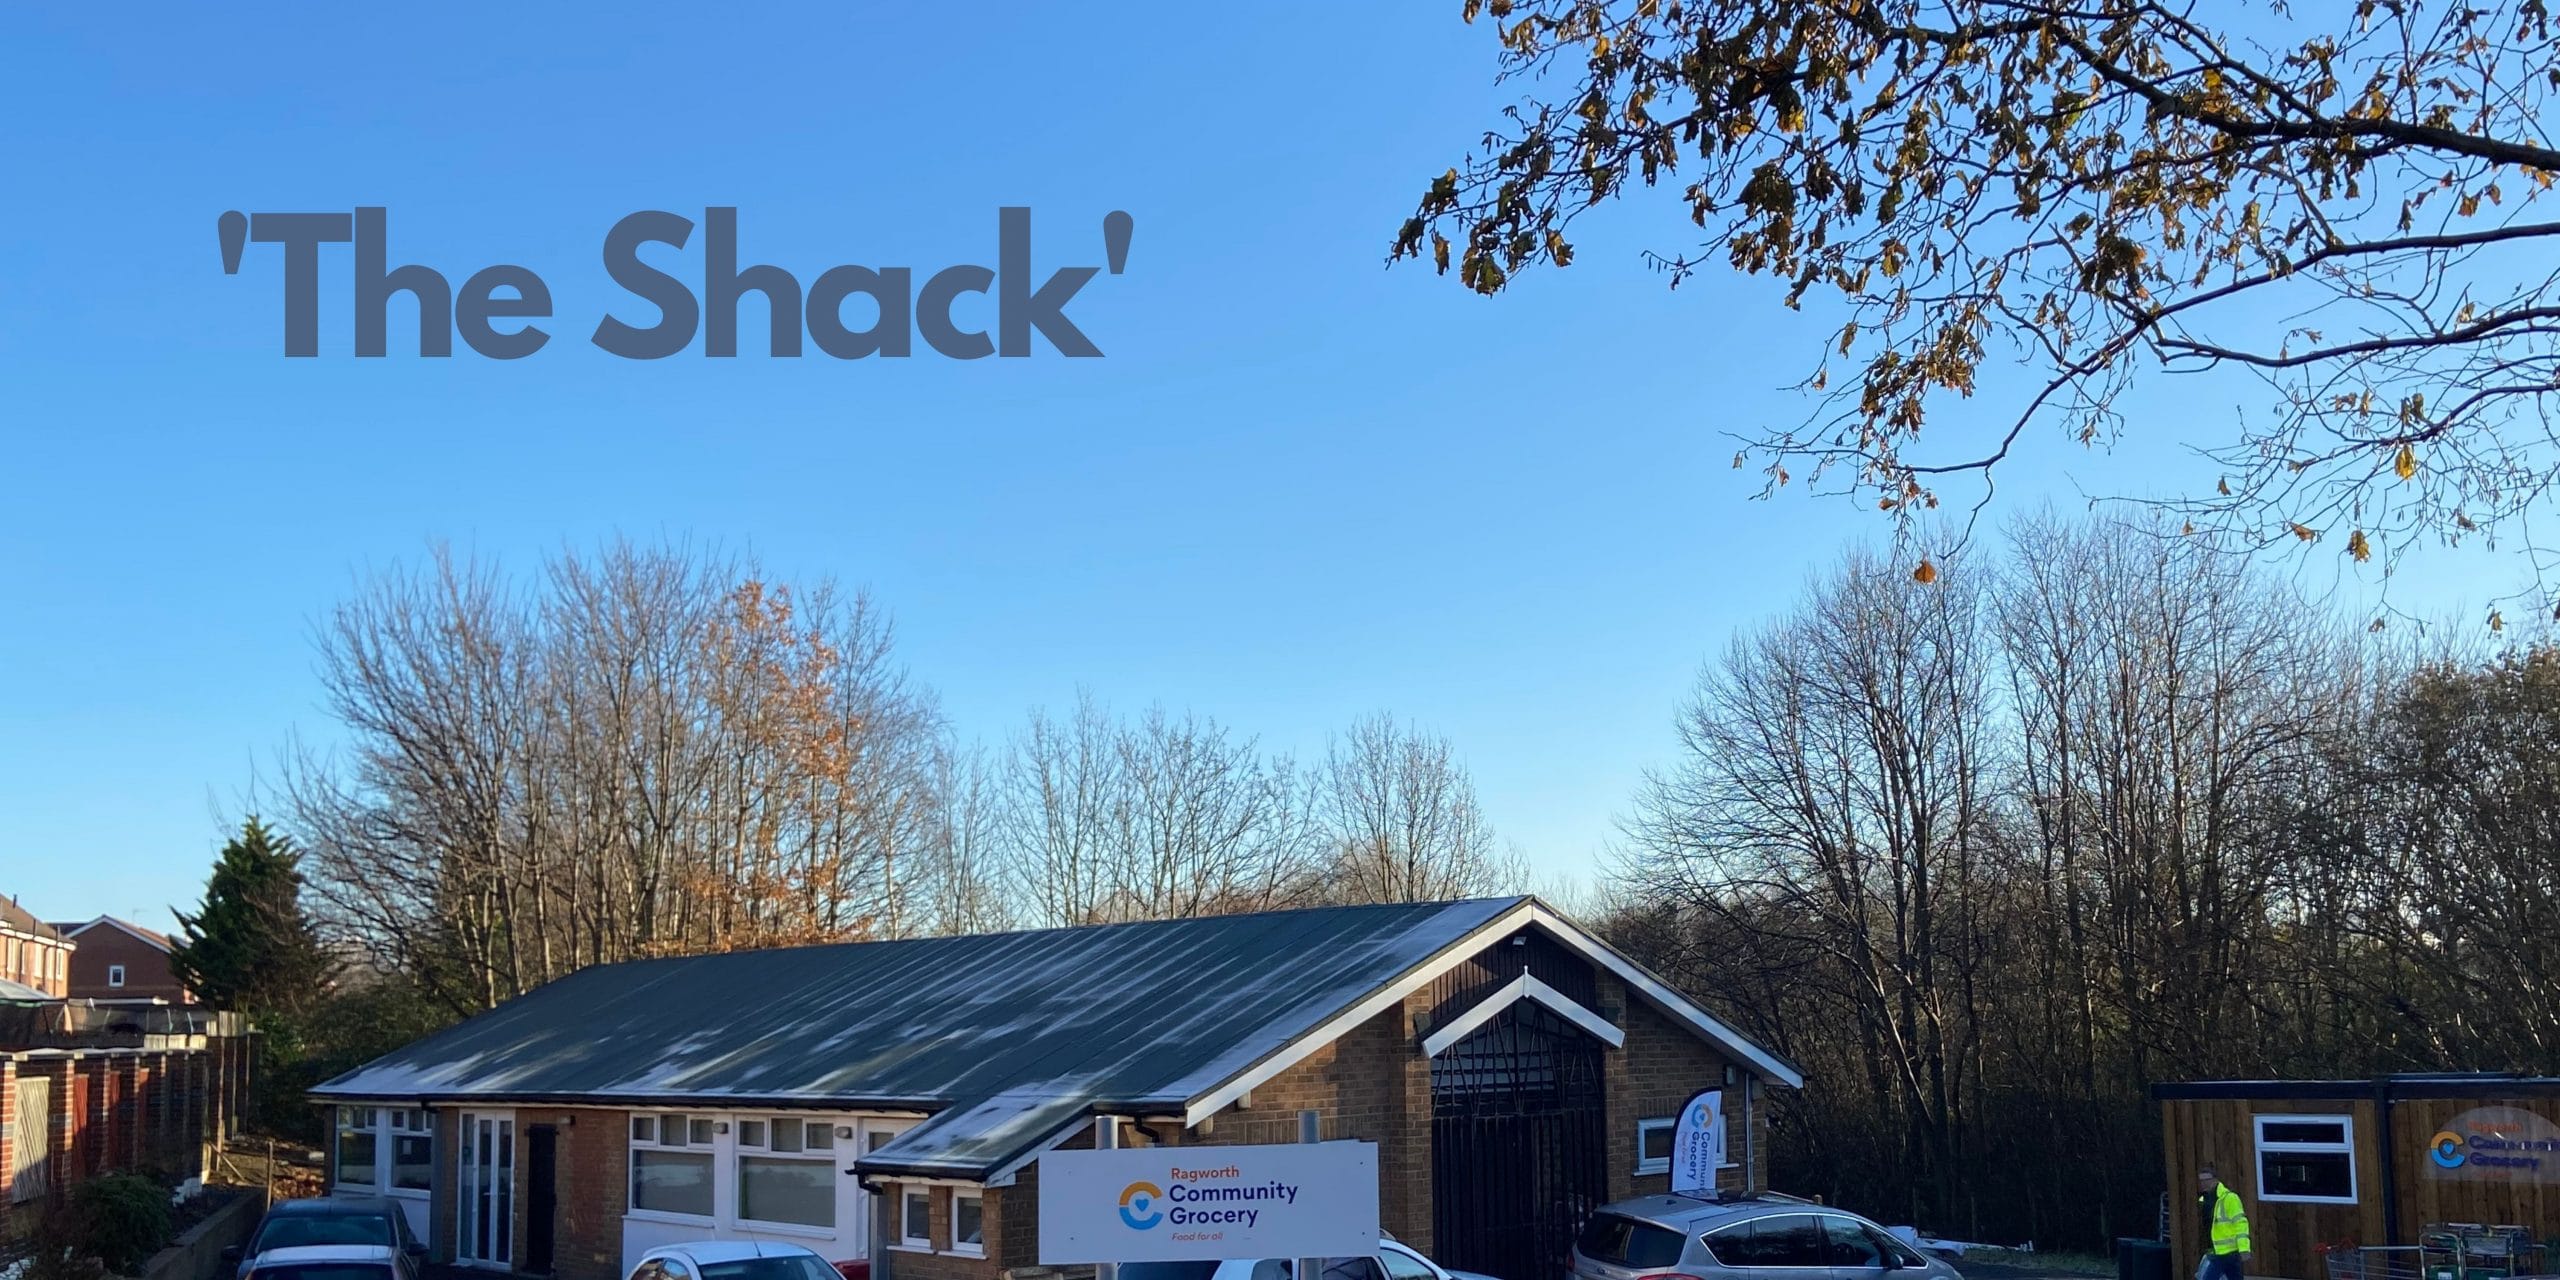 What has been happening over at The Shack?